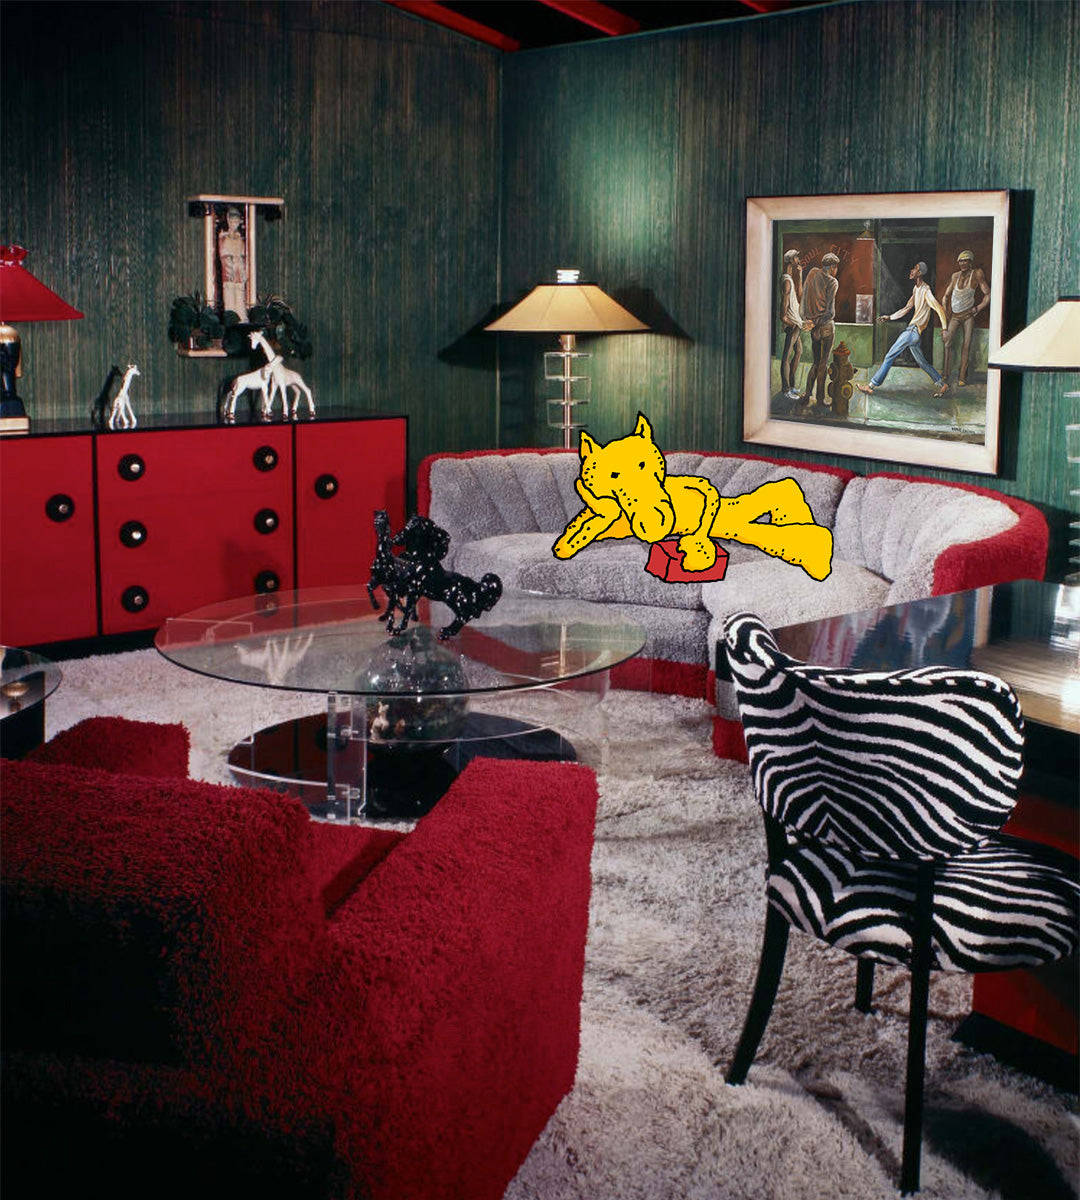 Lord Quas in his Echo Park home, photographed a few years ago by Maynard Parker.